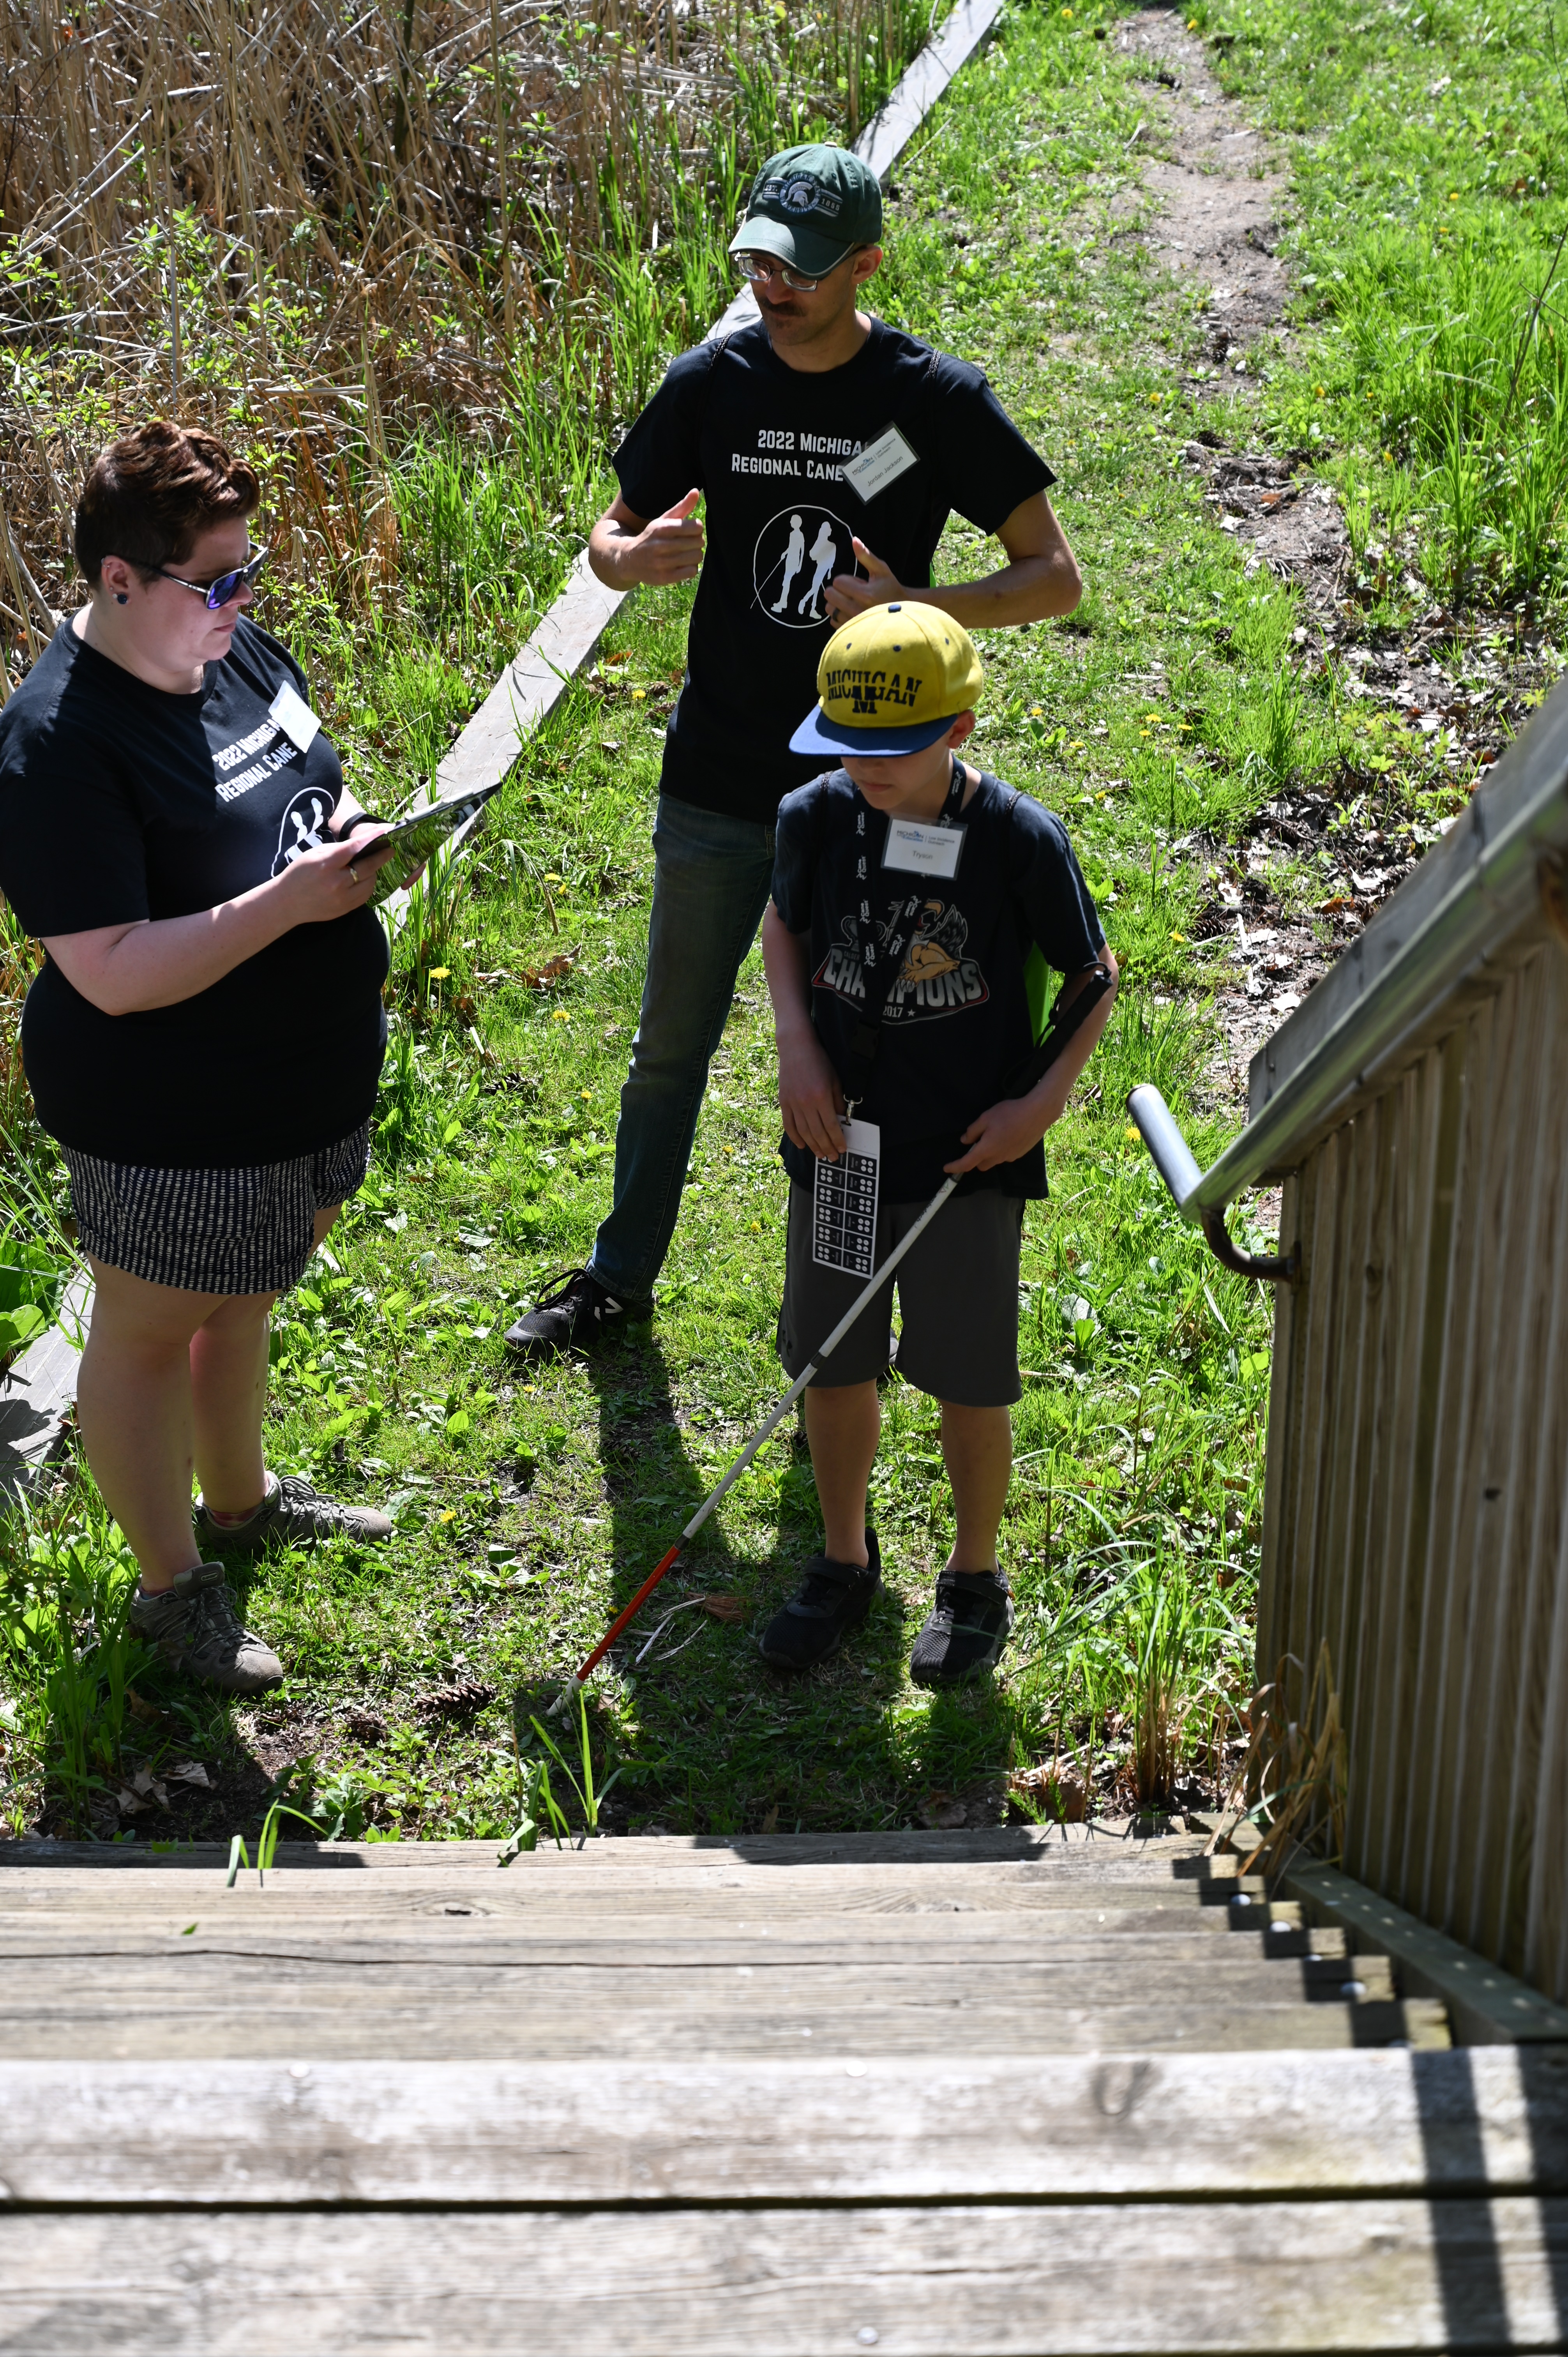 A boy navigates with a cane outside while volunteers give instructions.